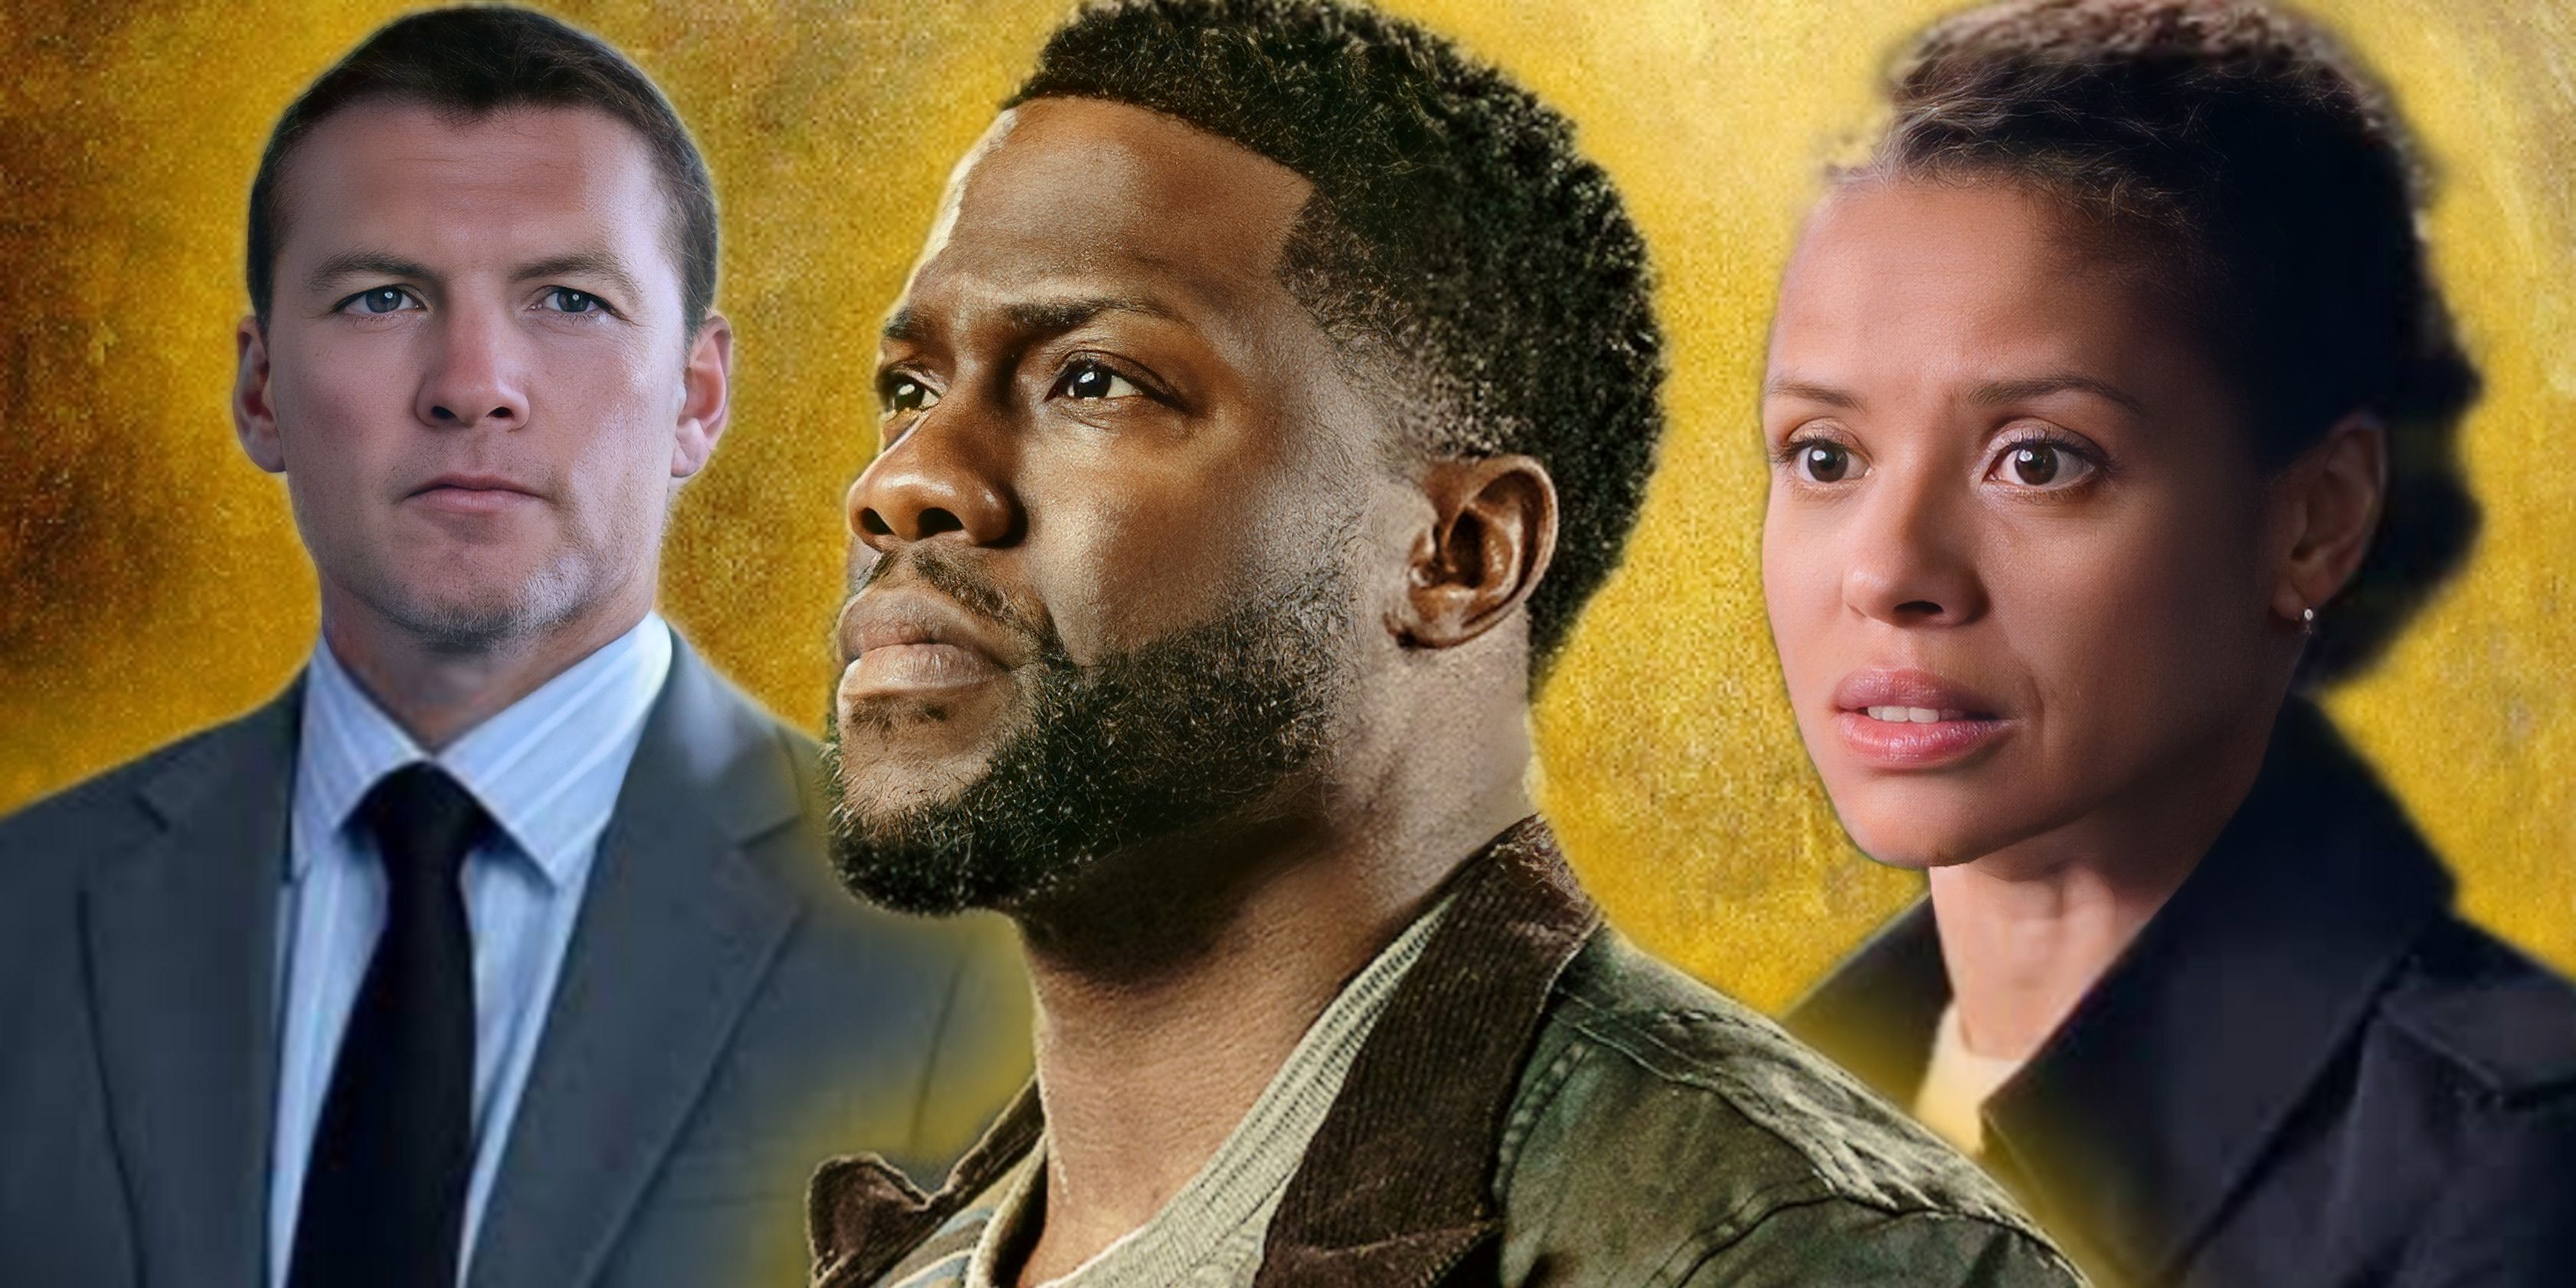 Sam Worthington as Huxley, Kevin Hart as Cyrus, and Gugu Mbatha-Raw as Abby in Netflix's Lift